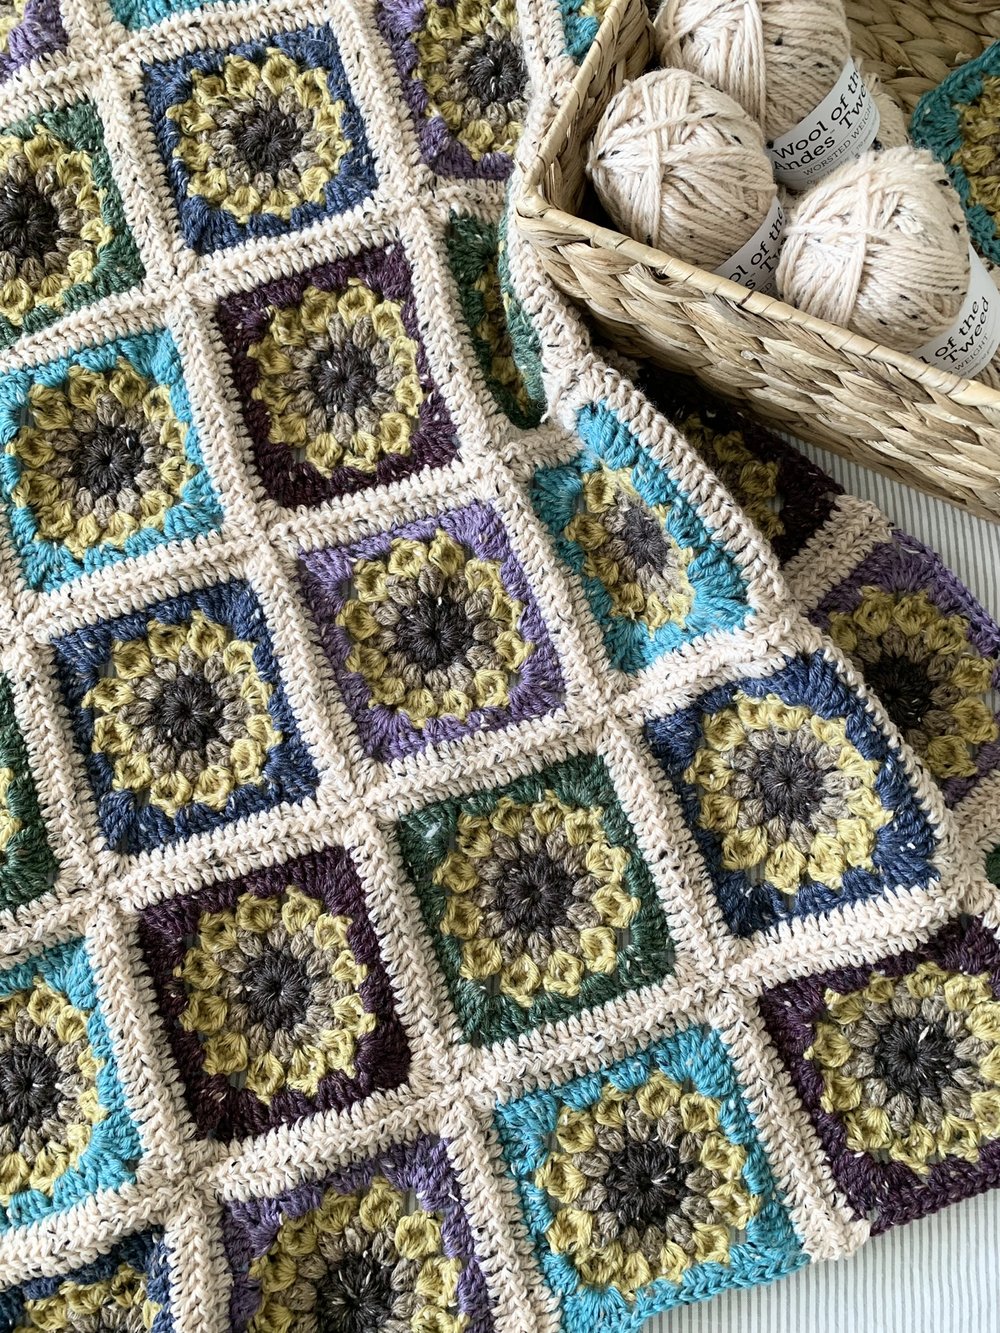 How To Make a Granny Square Blanket - Smiling Colors